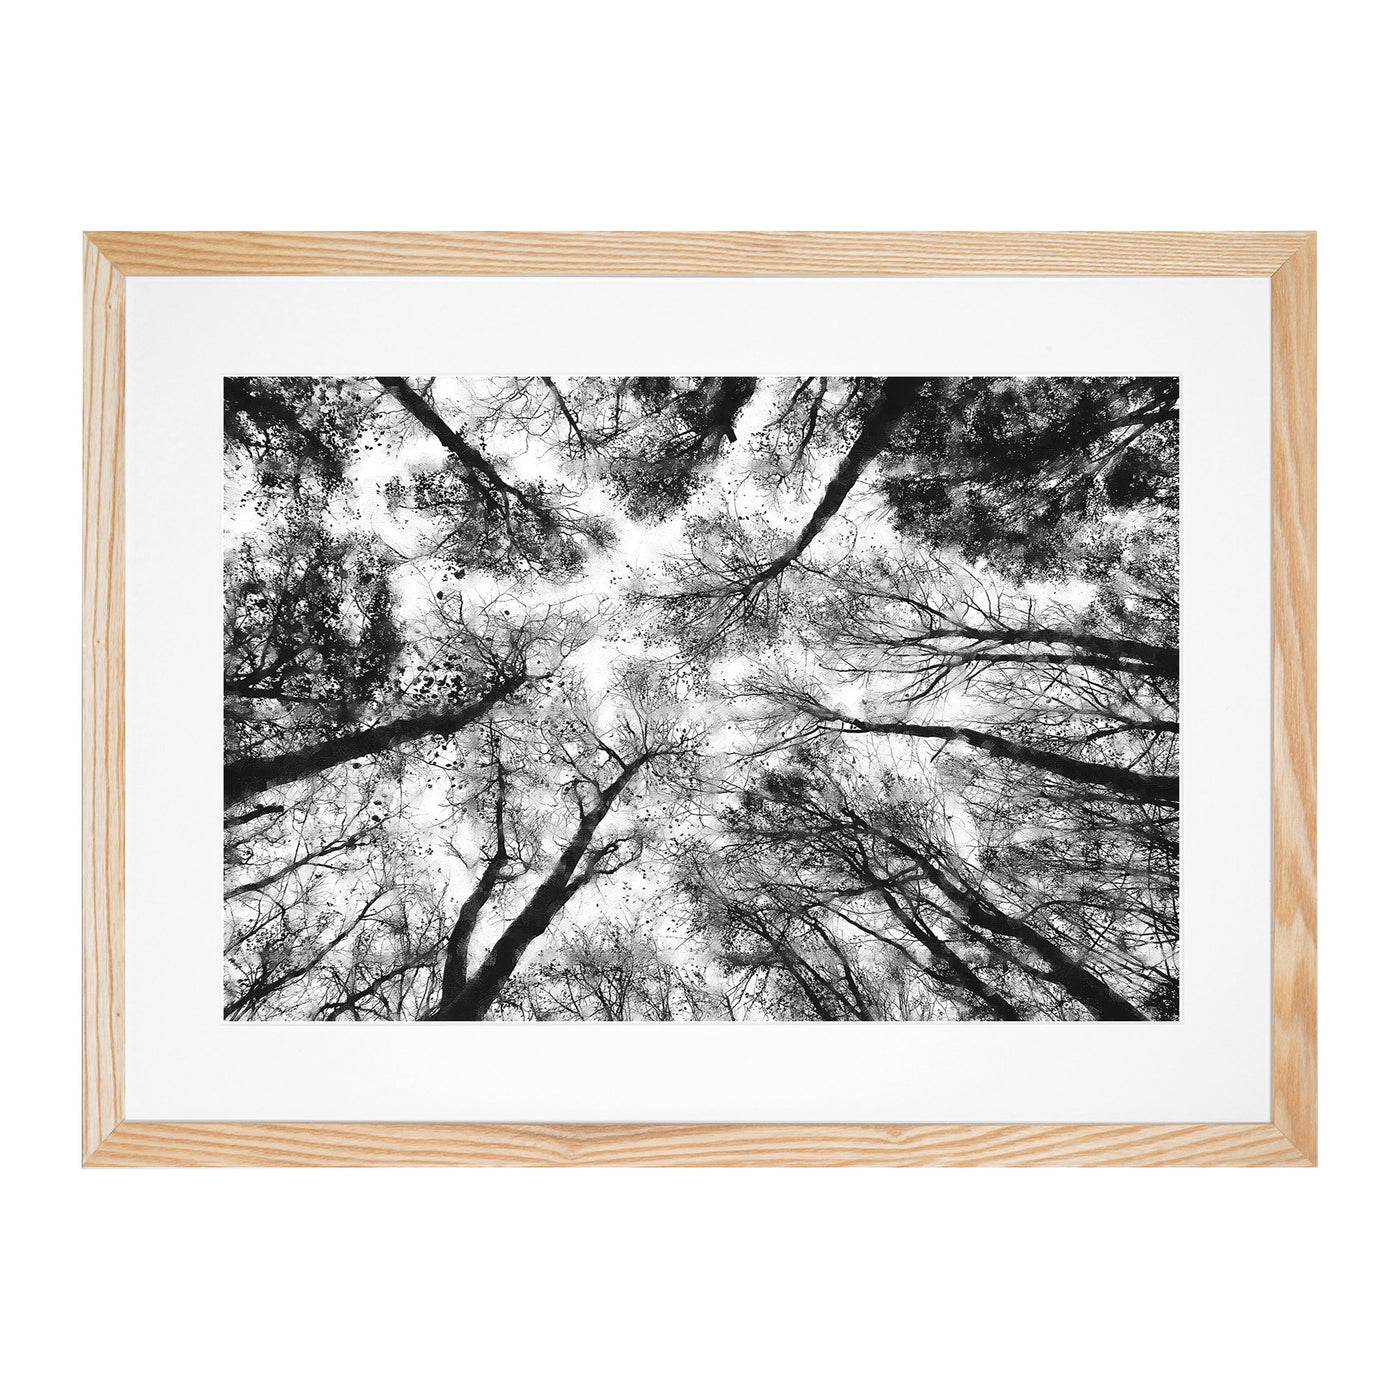 Vaulted Tree Branches